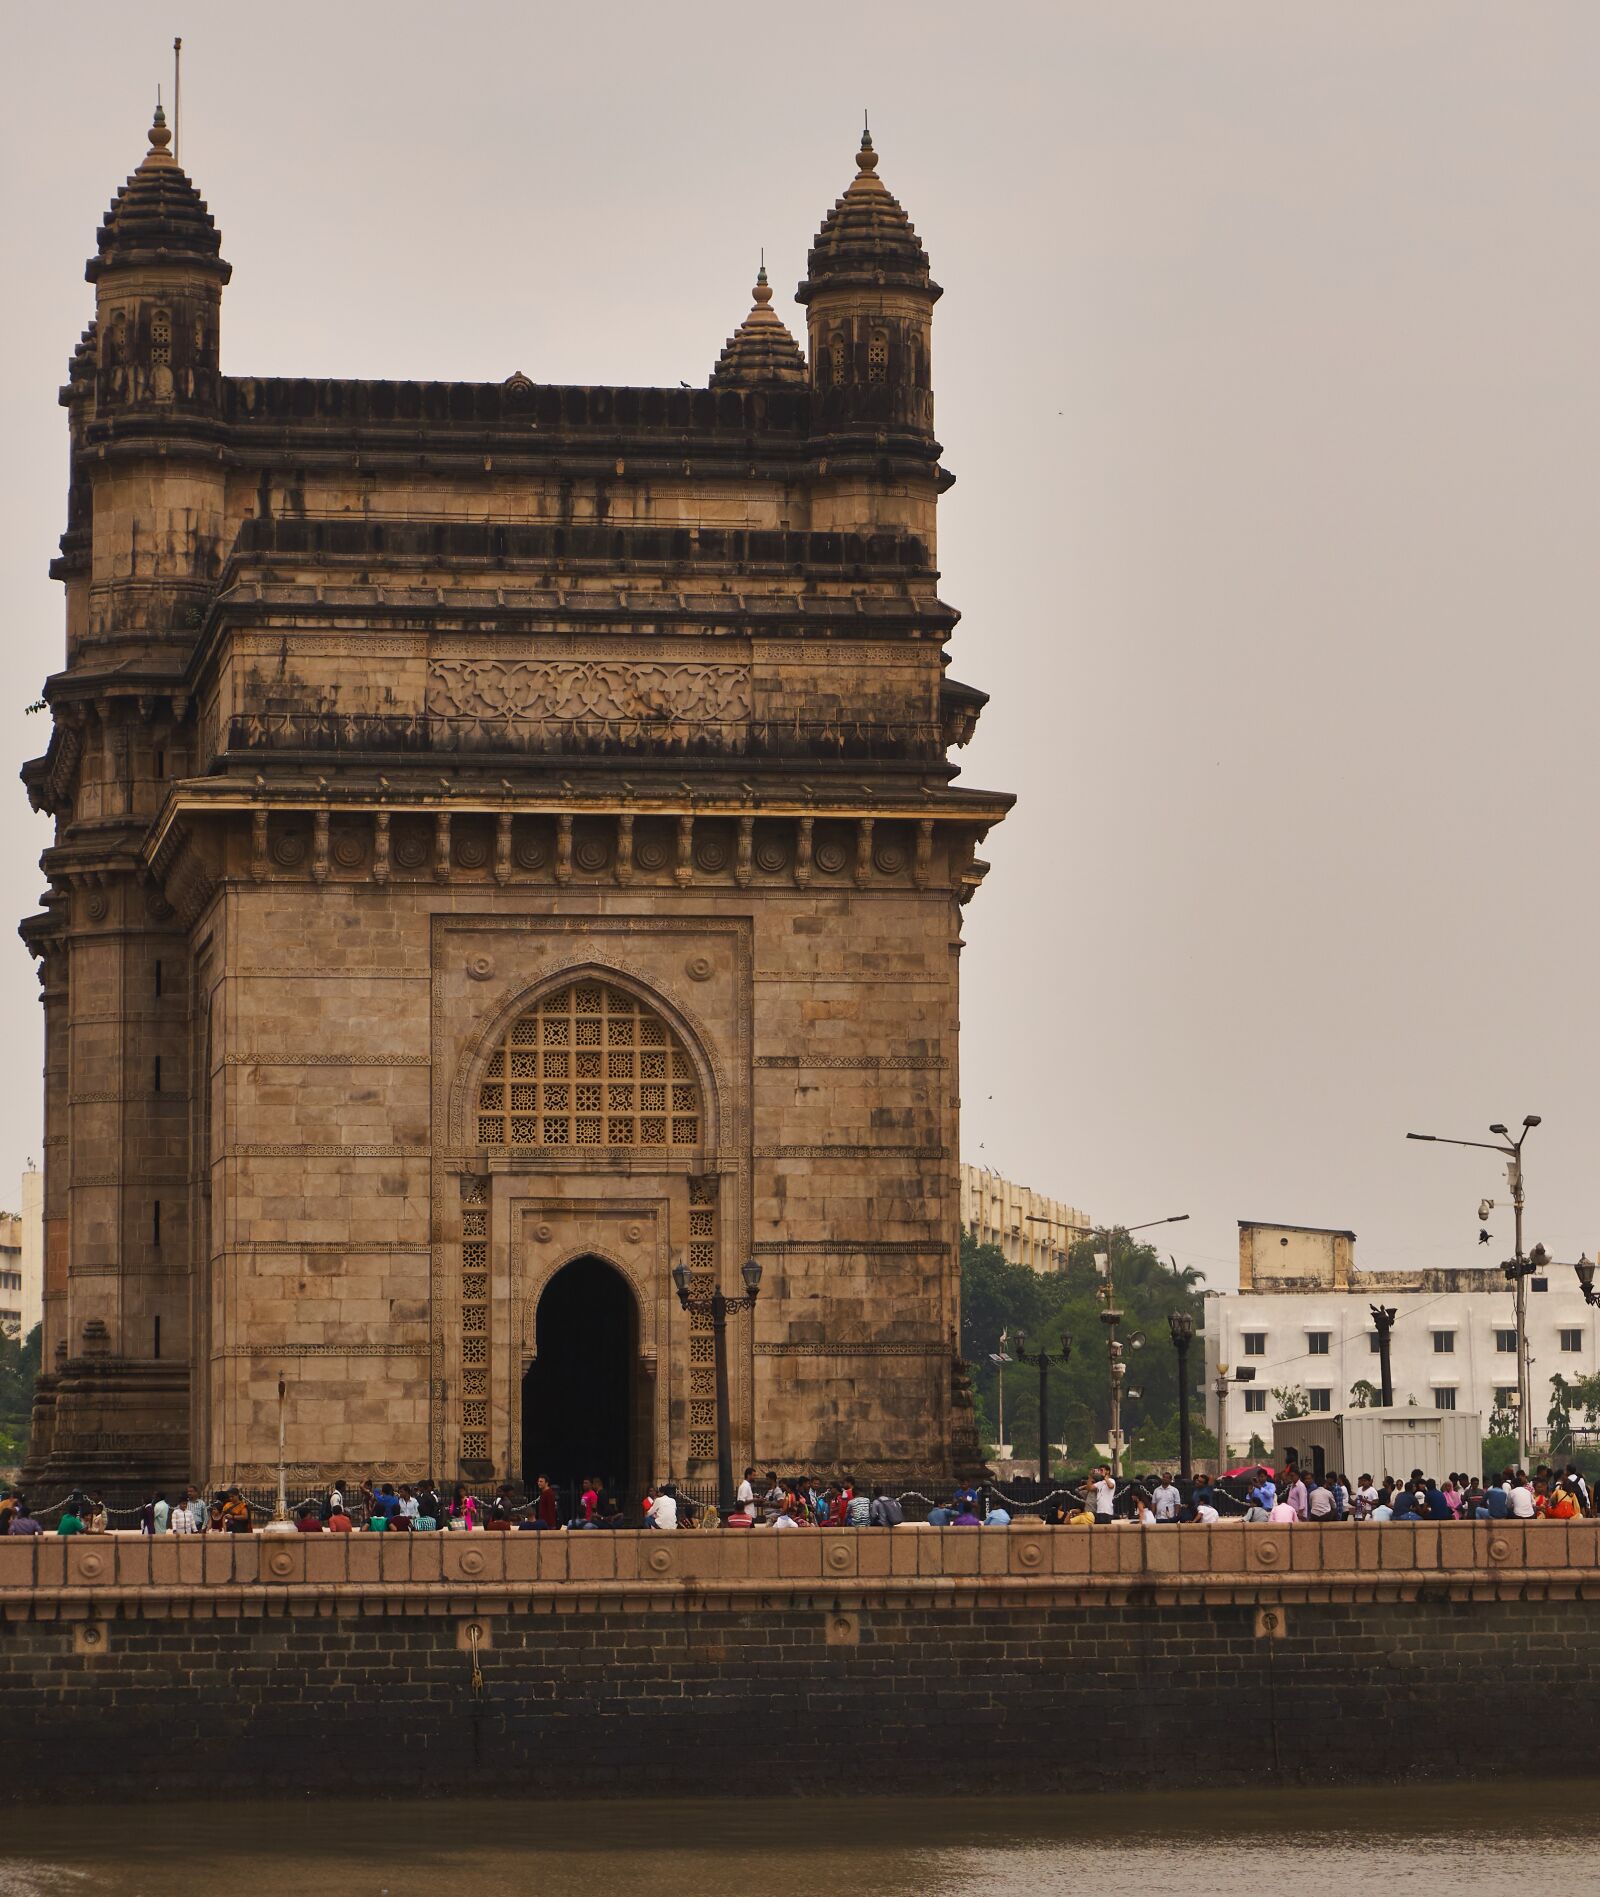 Sony a6300 + Sony E PZ 16-50 mm F3.5-5.6 OSS (SELP1650) sample photo. Gateway of india, gateway photography